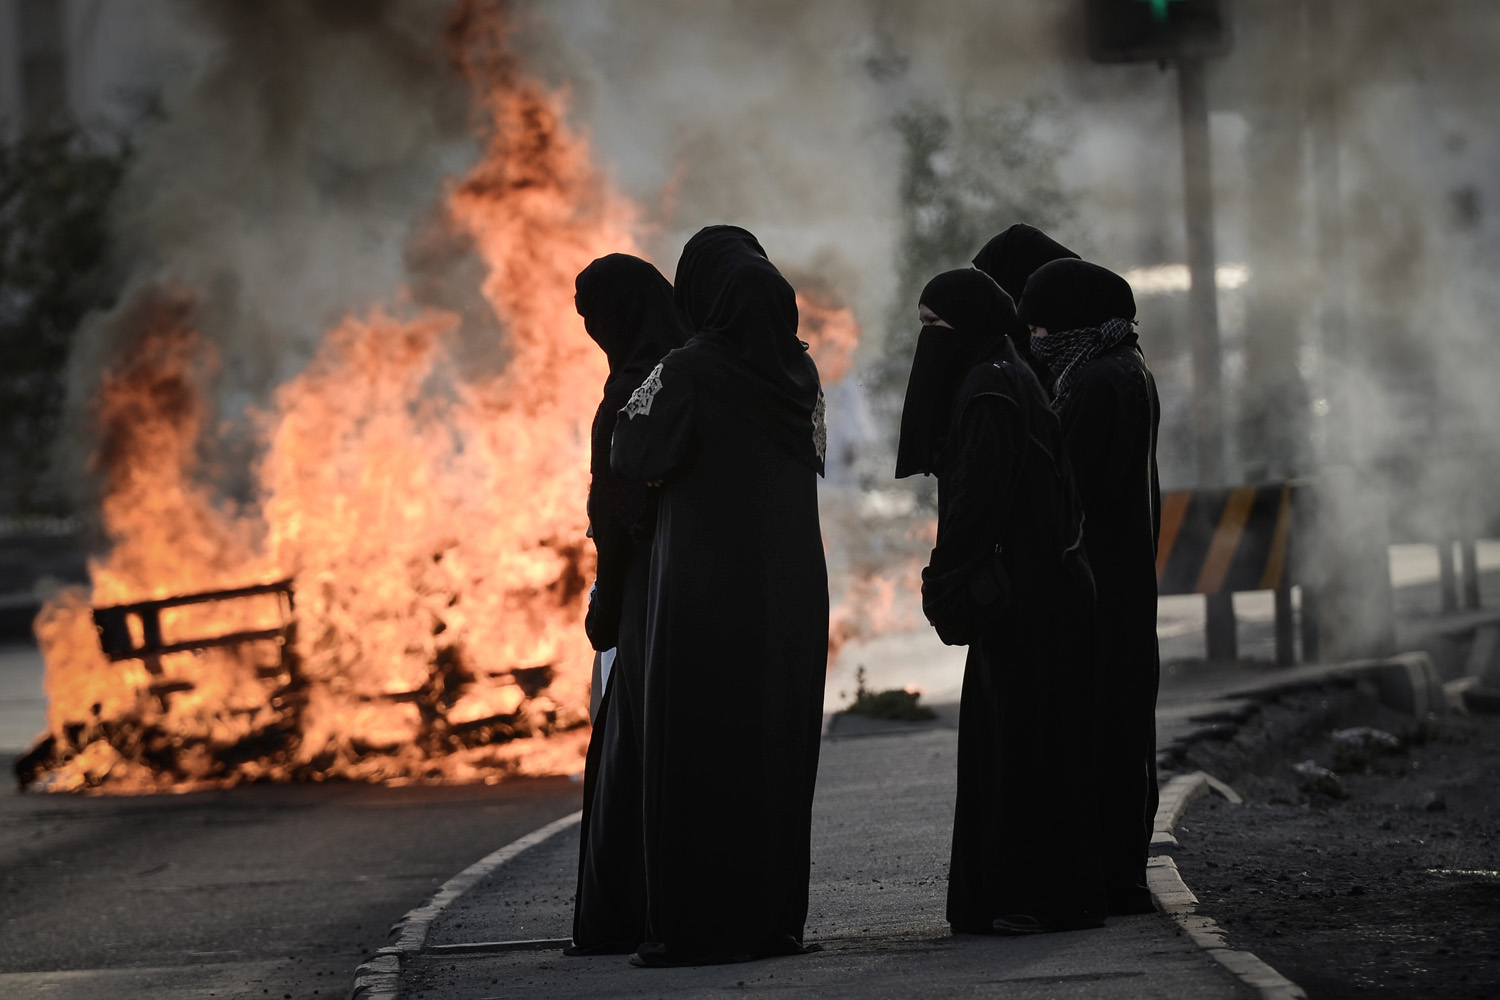 April 15, 2013. Bahraini women shout anti-regime slogans during a rally in support of political activists held in prison in the village of Jidhafs, west of Manama.